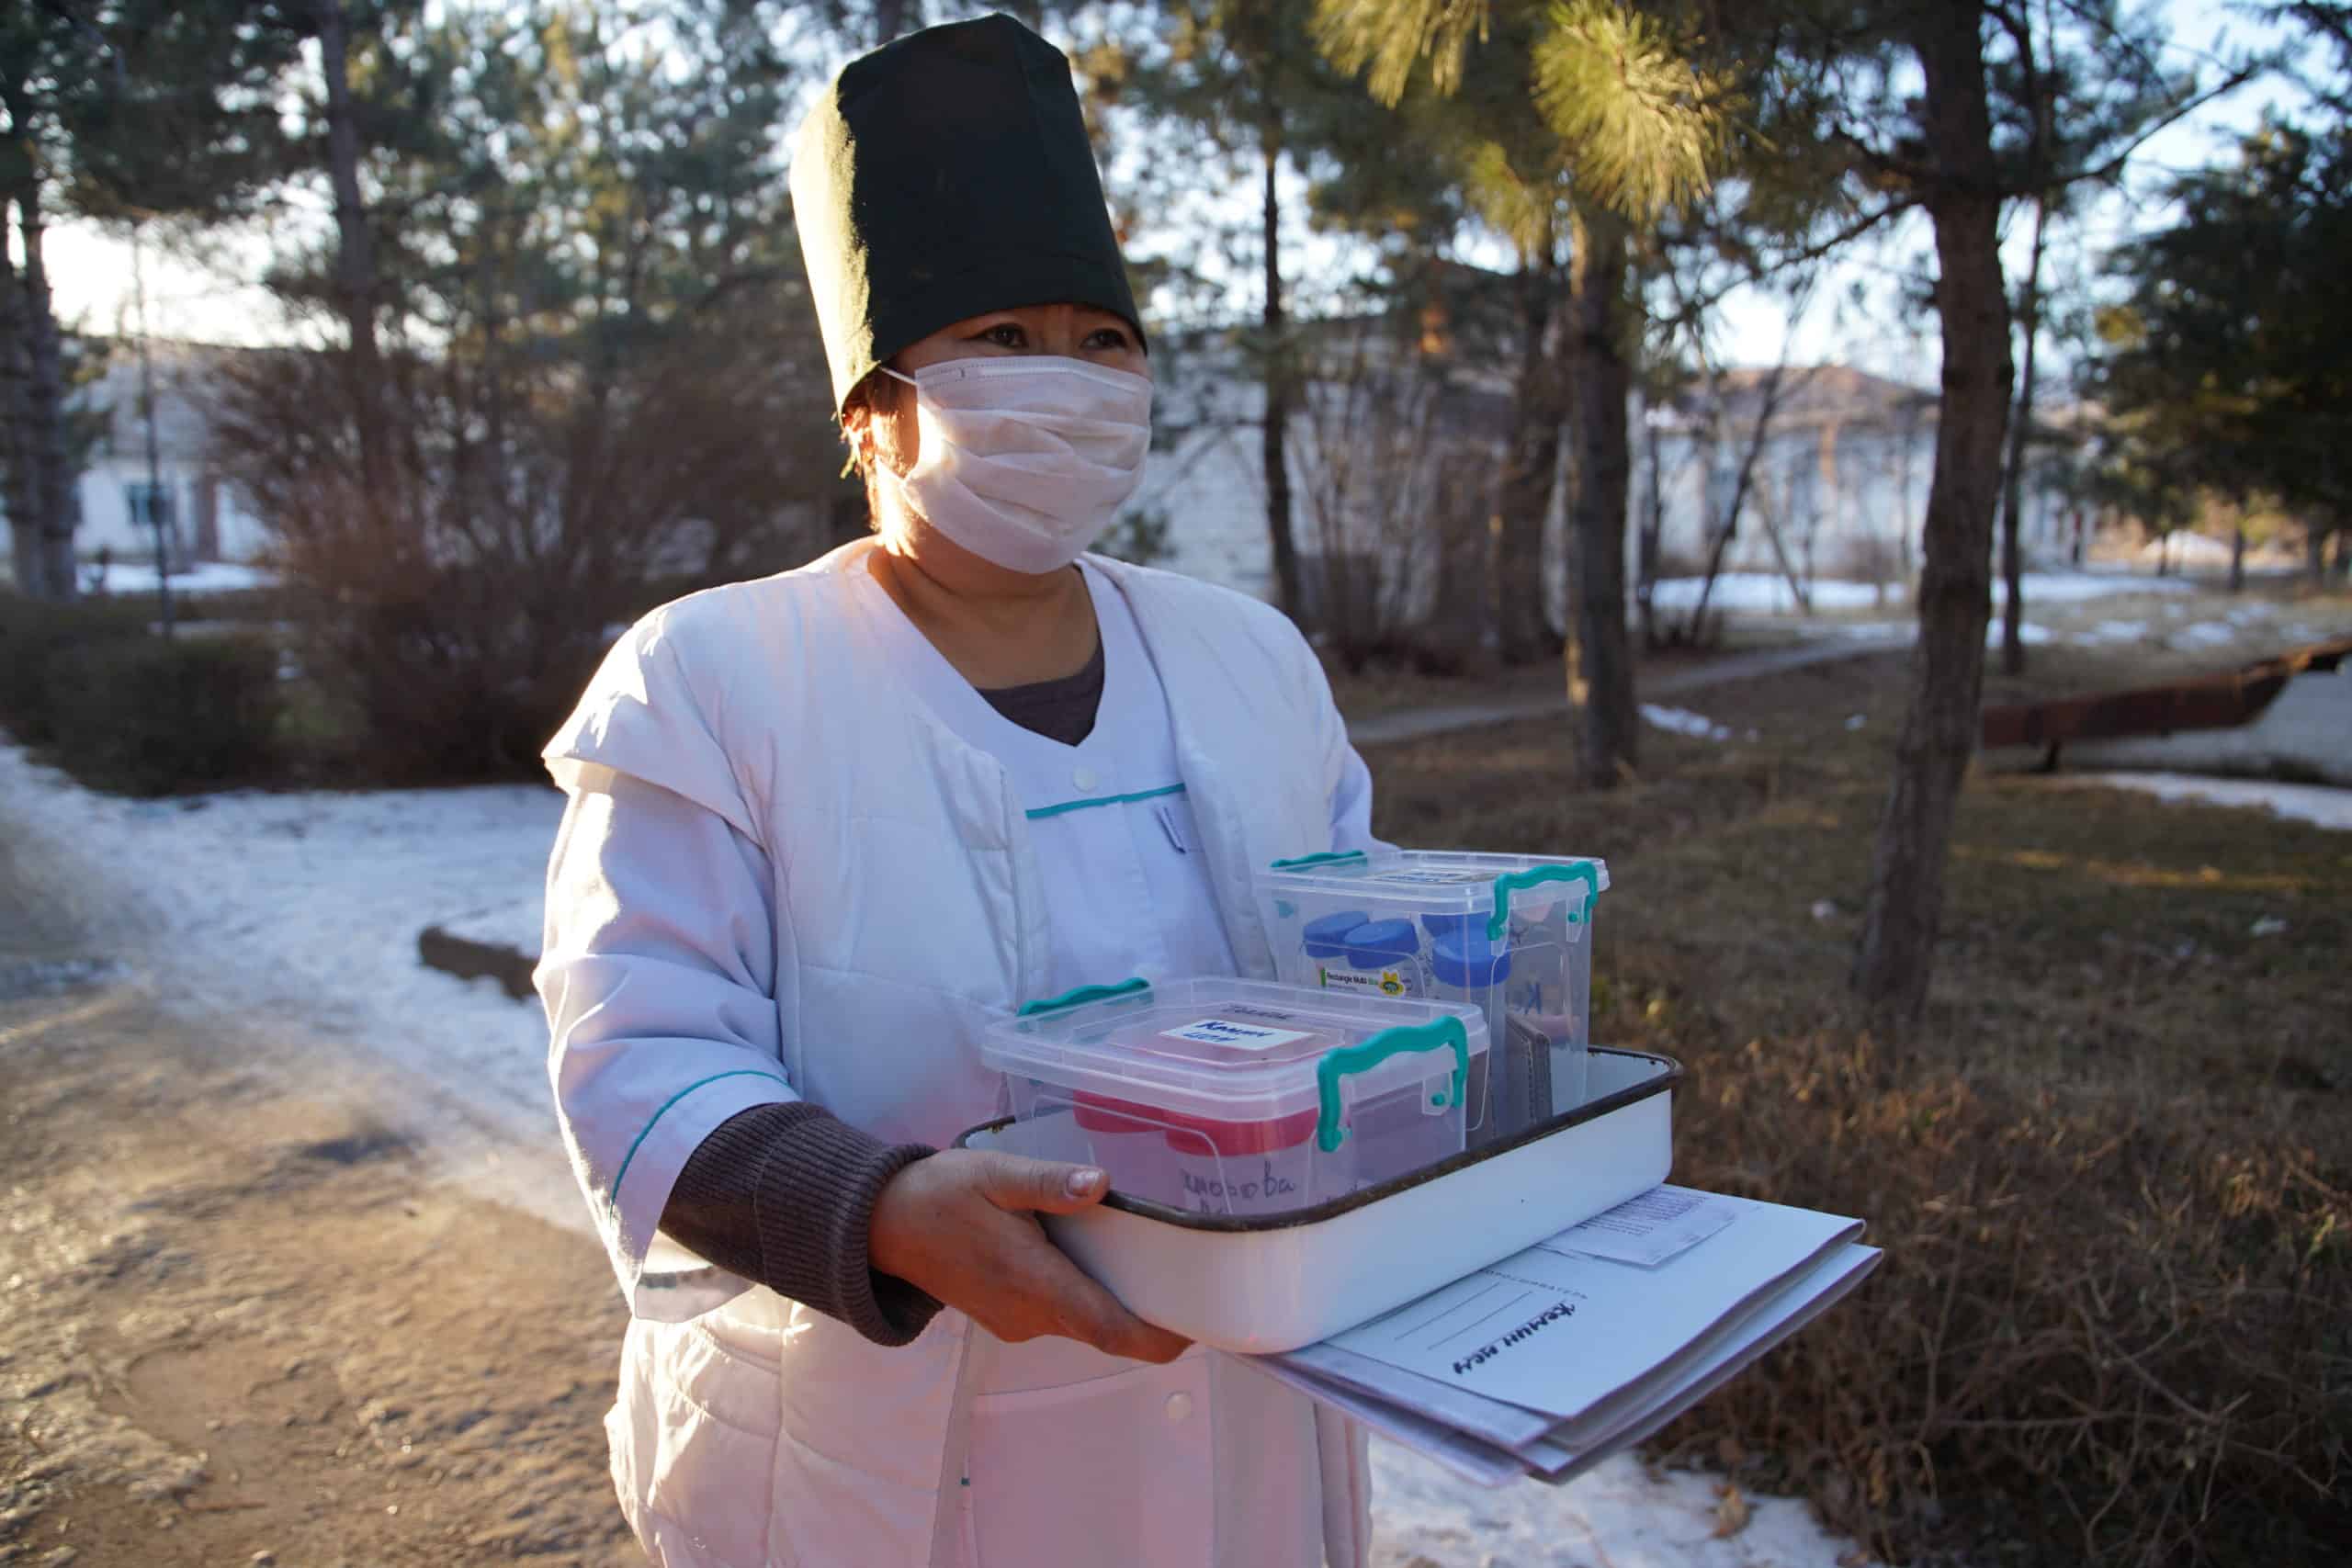 A health worker in Kyrgyz Republic carries supplies while wearing a mask.